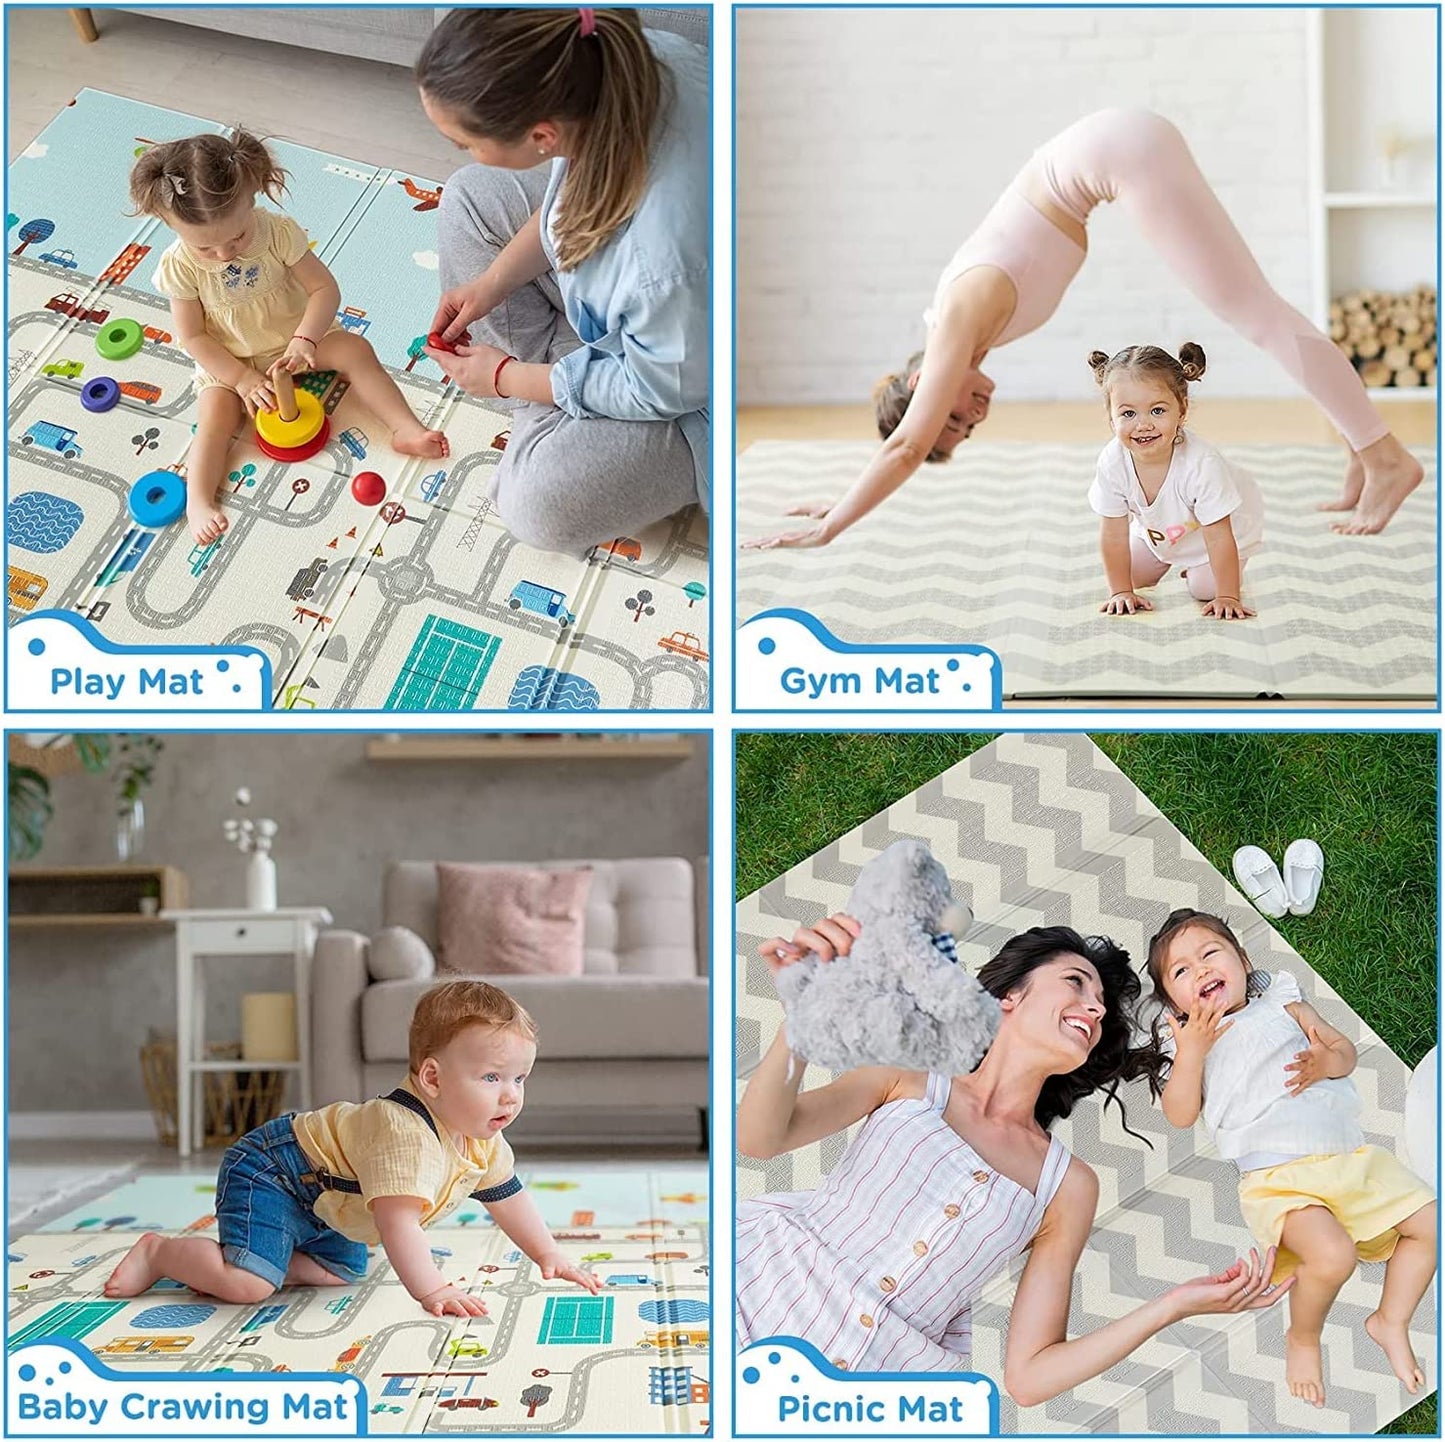  Random Foldable Waterproof Playmat with Thicken Foam - Buy Random Foldable Waterproof Playmat with Thicken Foam in Dubai - HOCC Dubai - Baby playground outdoor - Shop baby product - Shop Pet product - shop home decor and lighting in Dubai - HOCC Duba